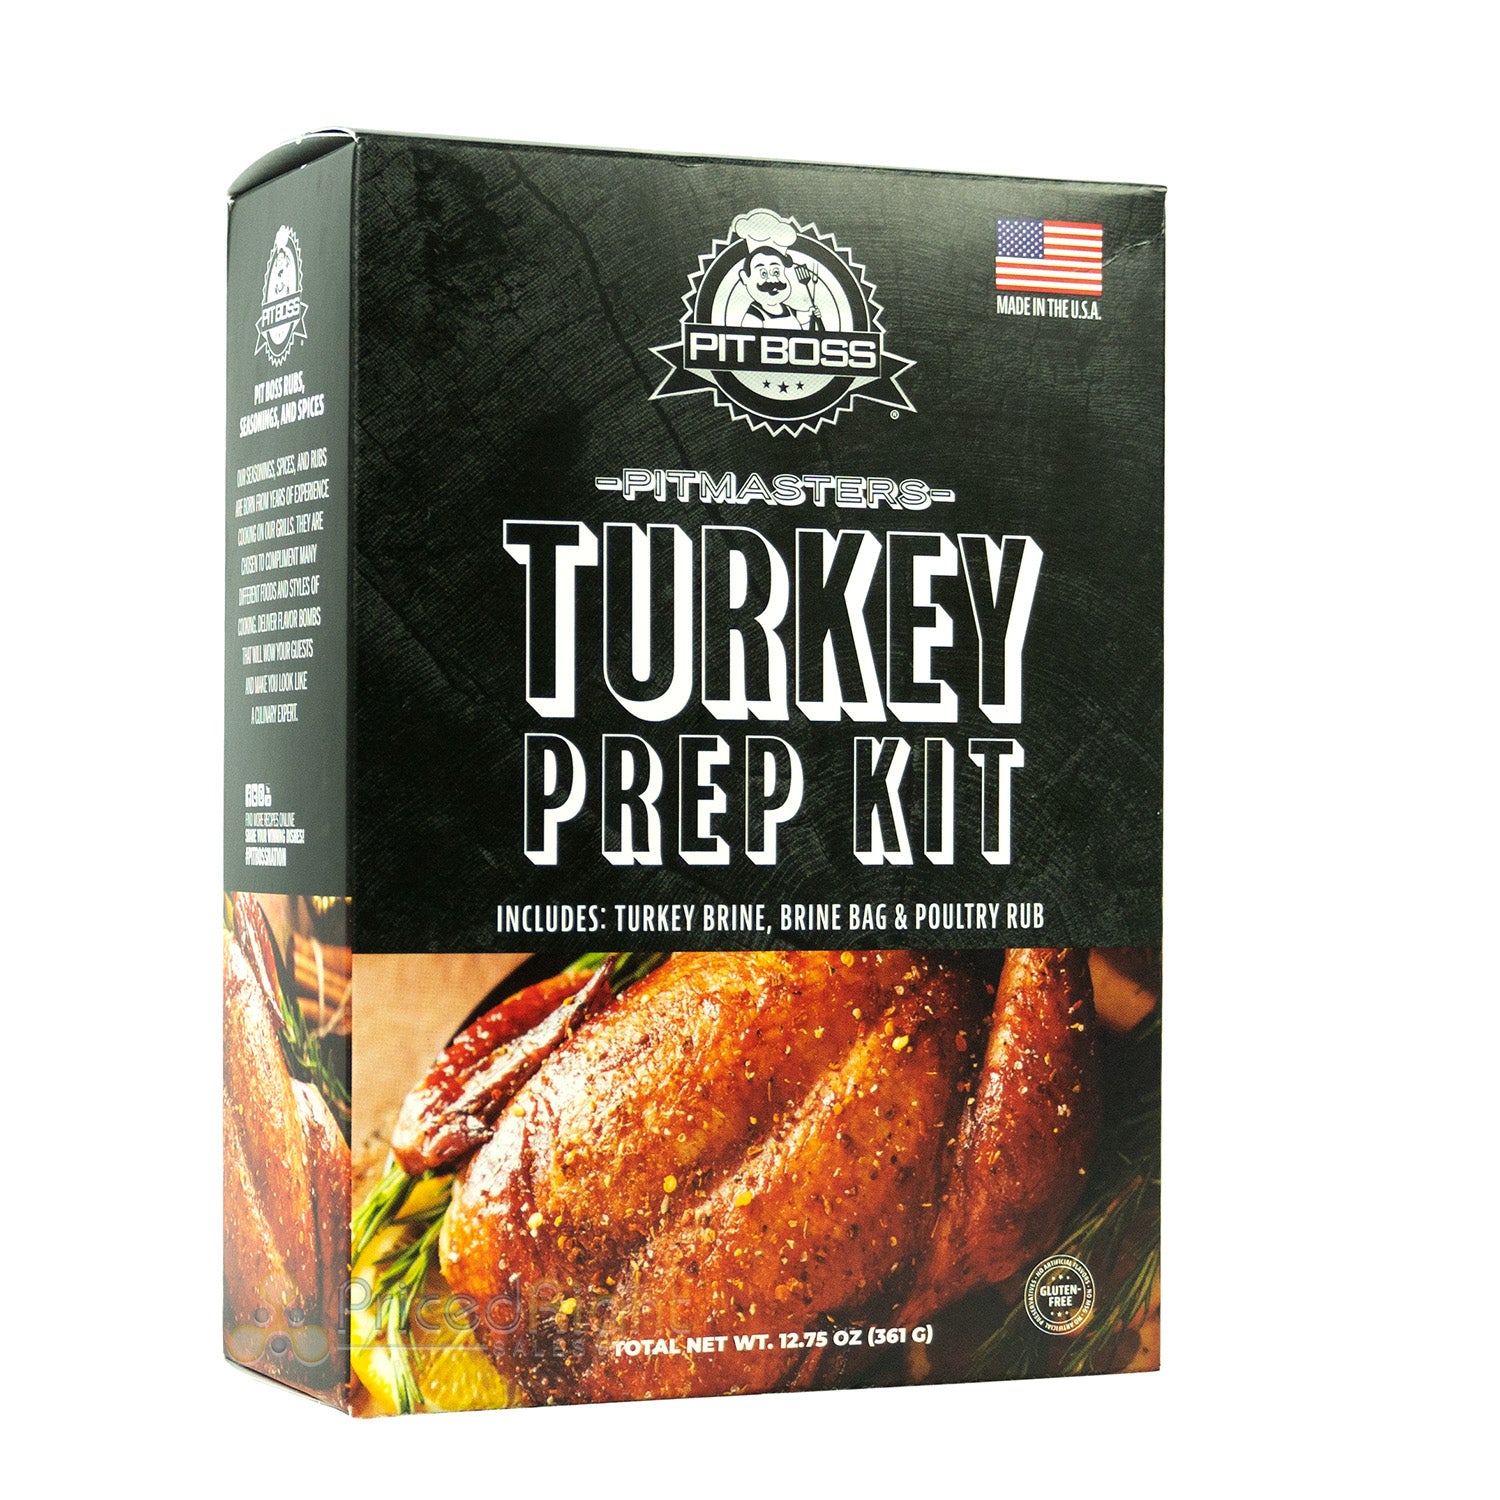 Pit Boss Turkey Brine Bag and Poultry Rub Prep Kit Pitmasters Holiday Flavor